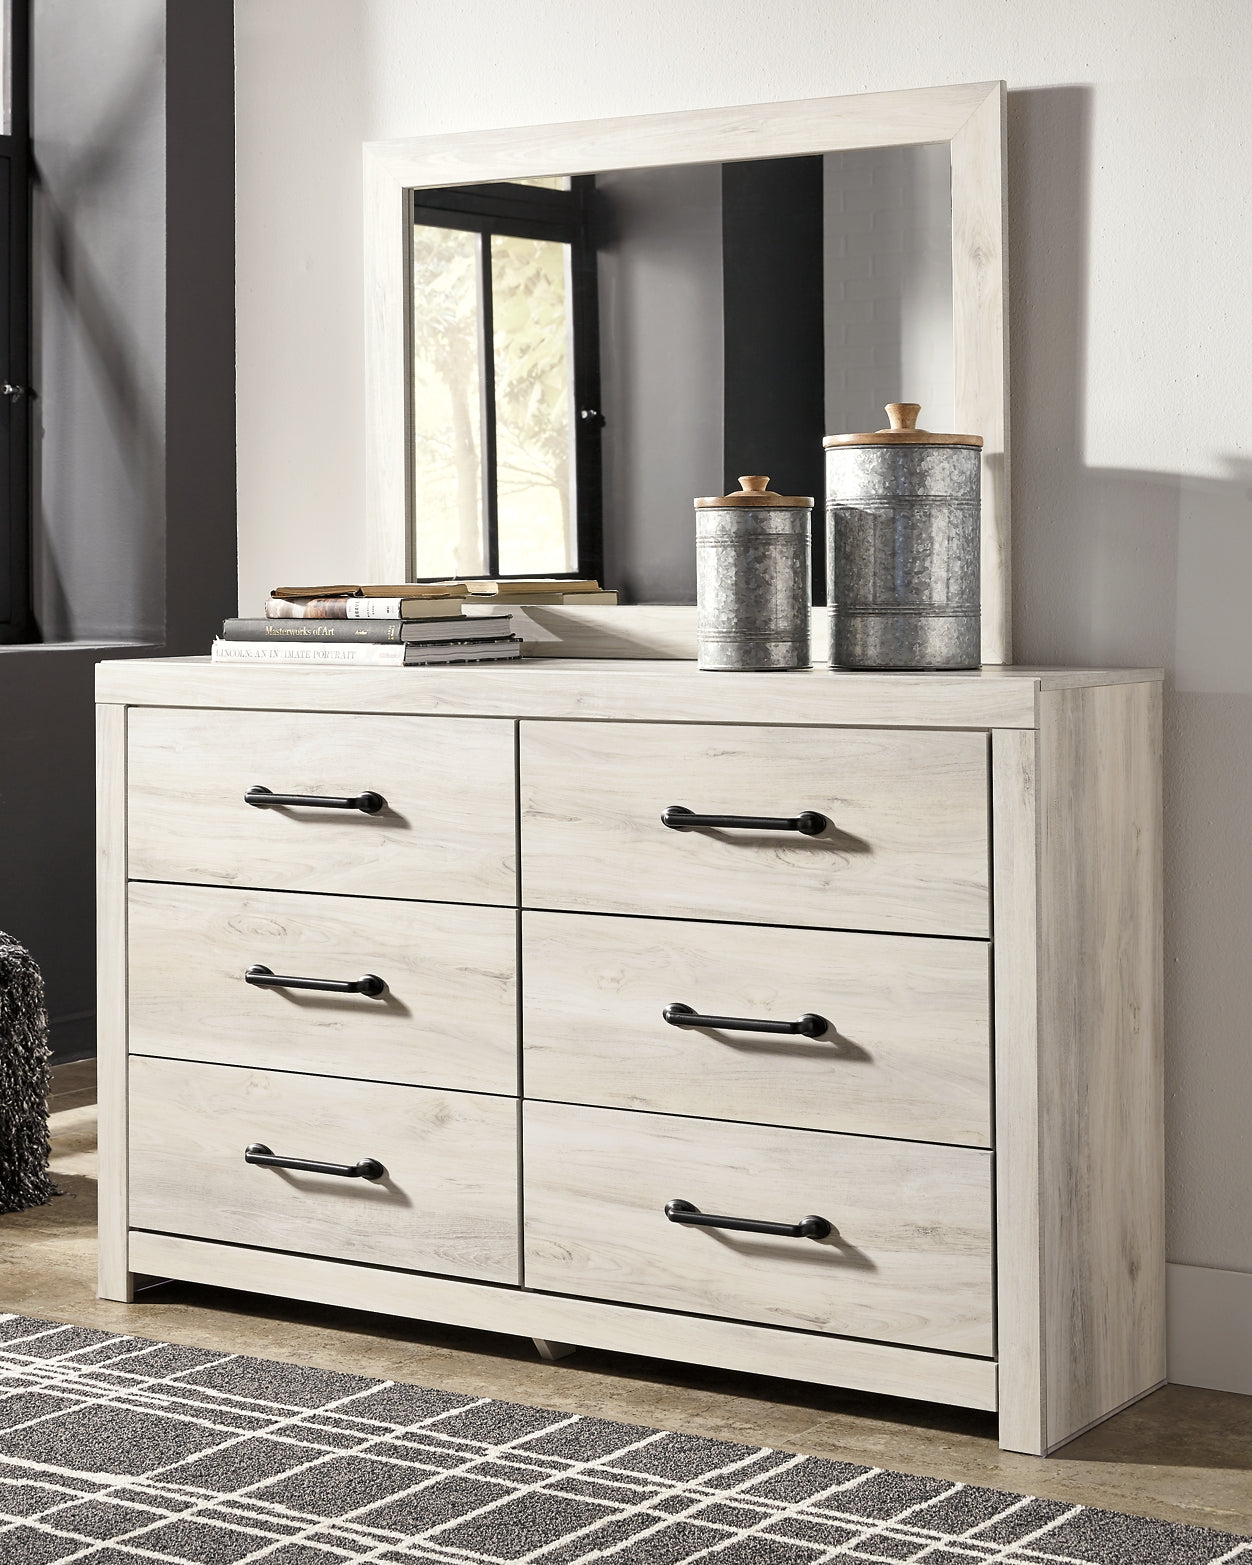 Cambeck King Panel Bed with 2 Storage Drawers with Mirrored Dresser Signature Design by Ashley®